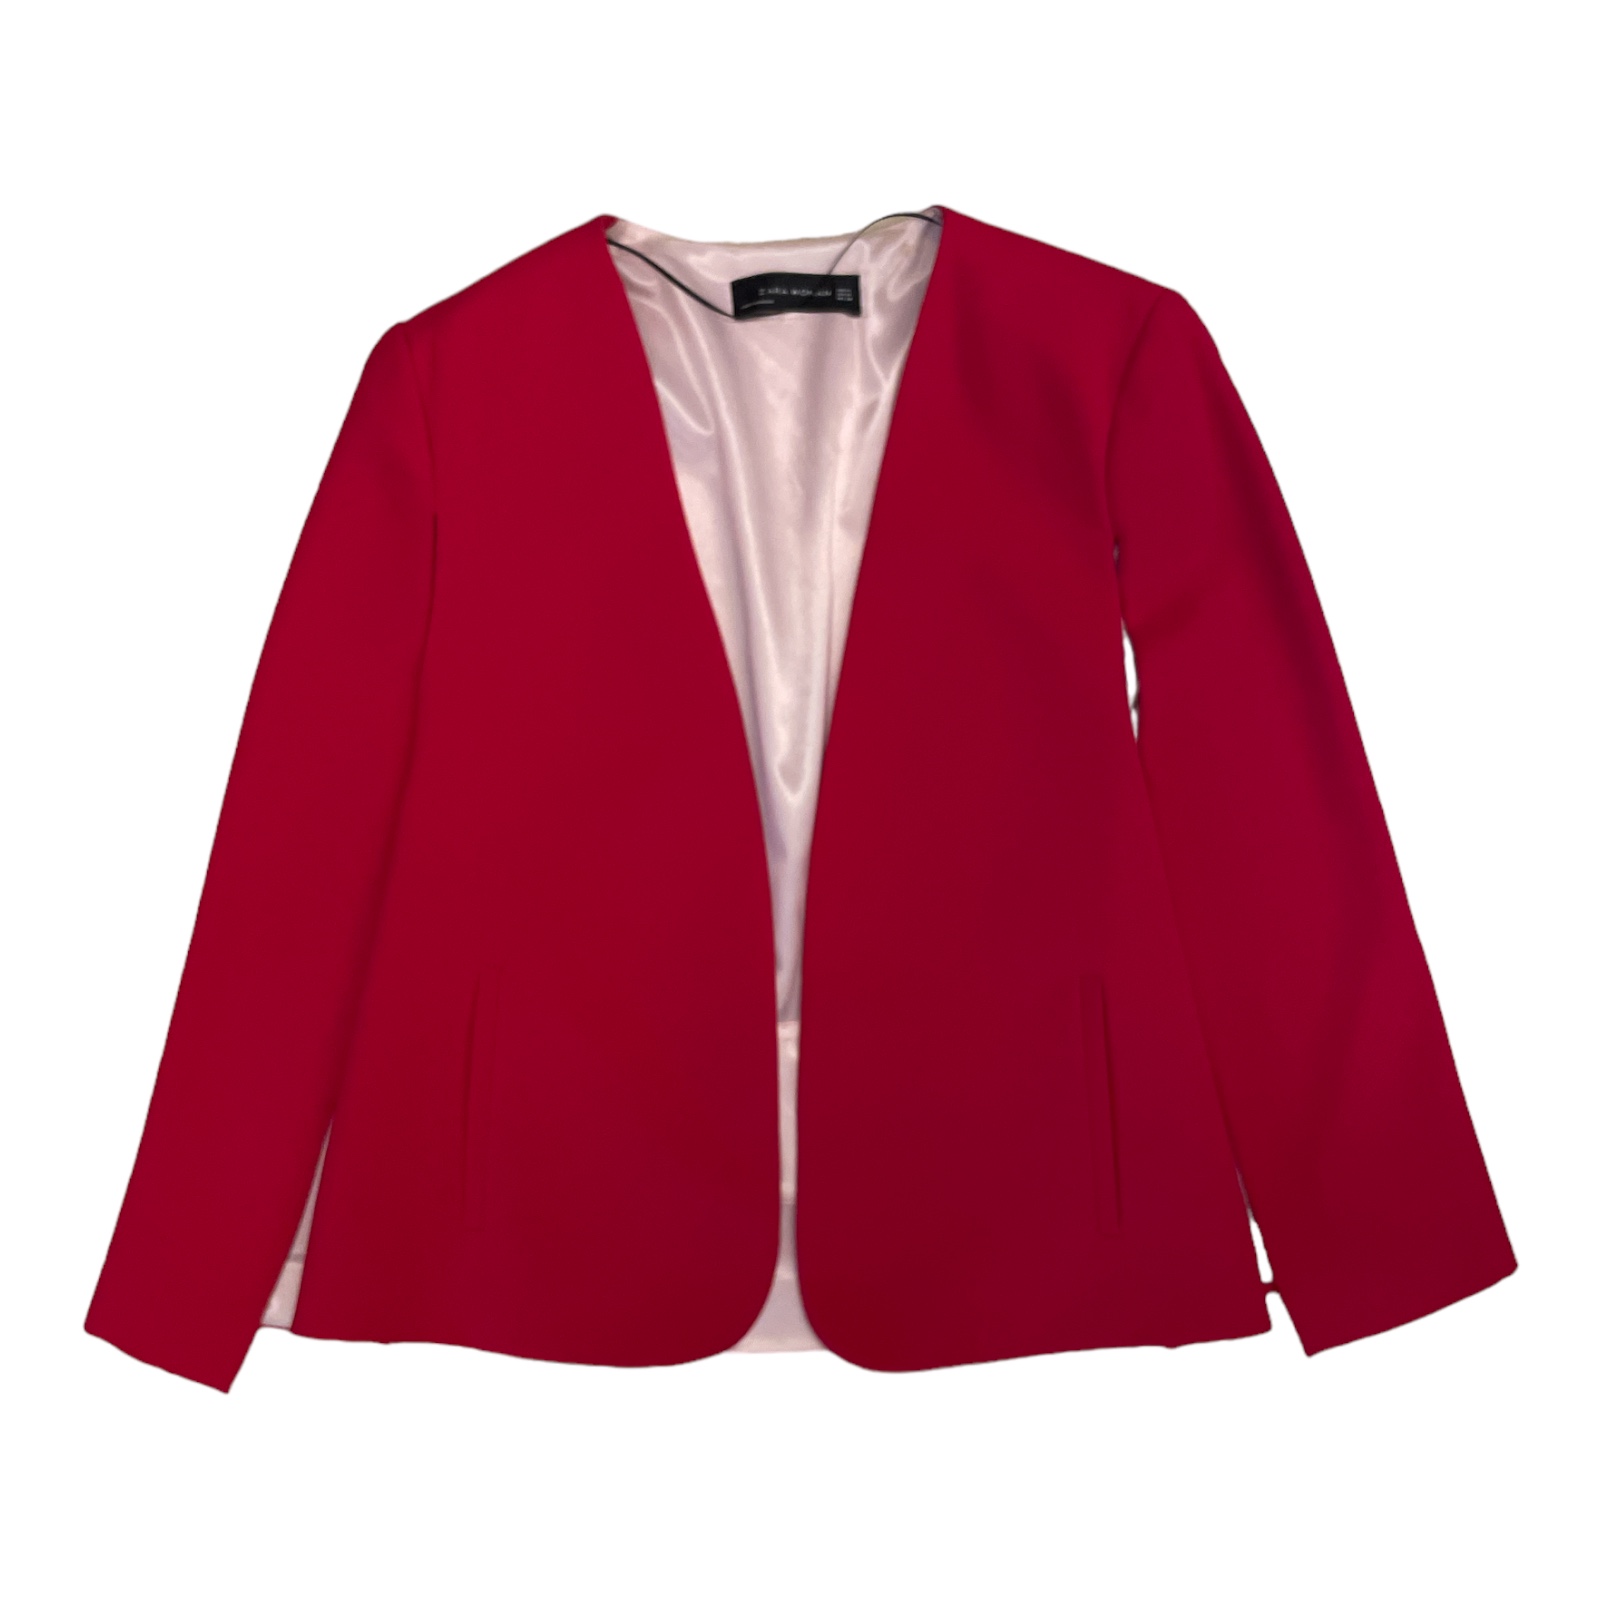 Zara_Pink_Blazer_With_Cape-Style_Sleeves_Front